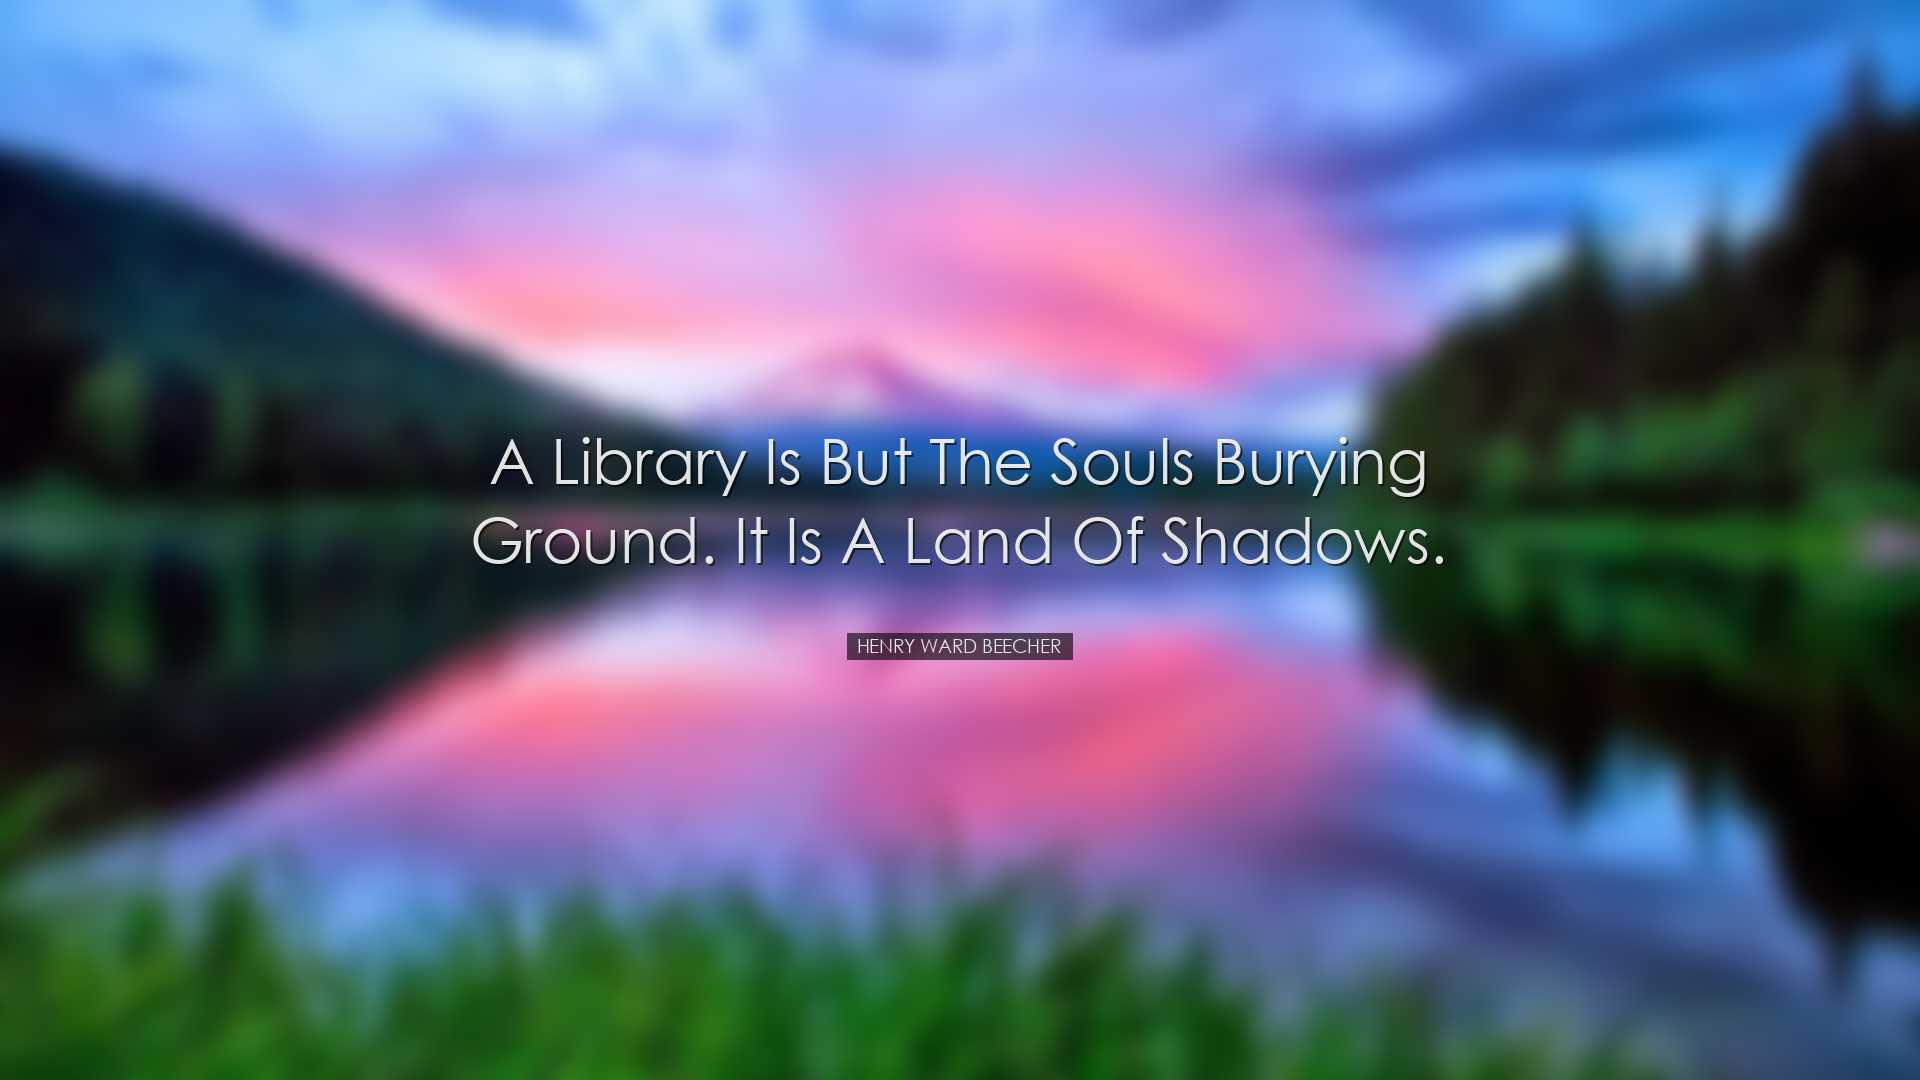 A library is but the souls burying ground. It is a land of shadows